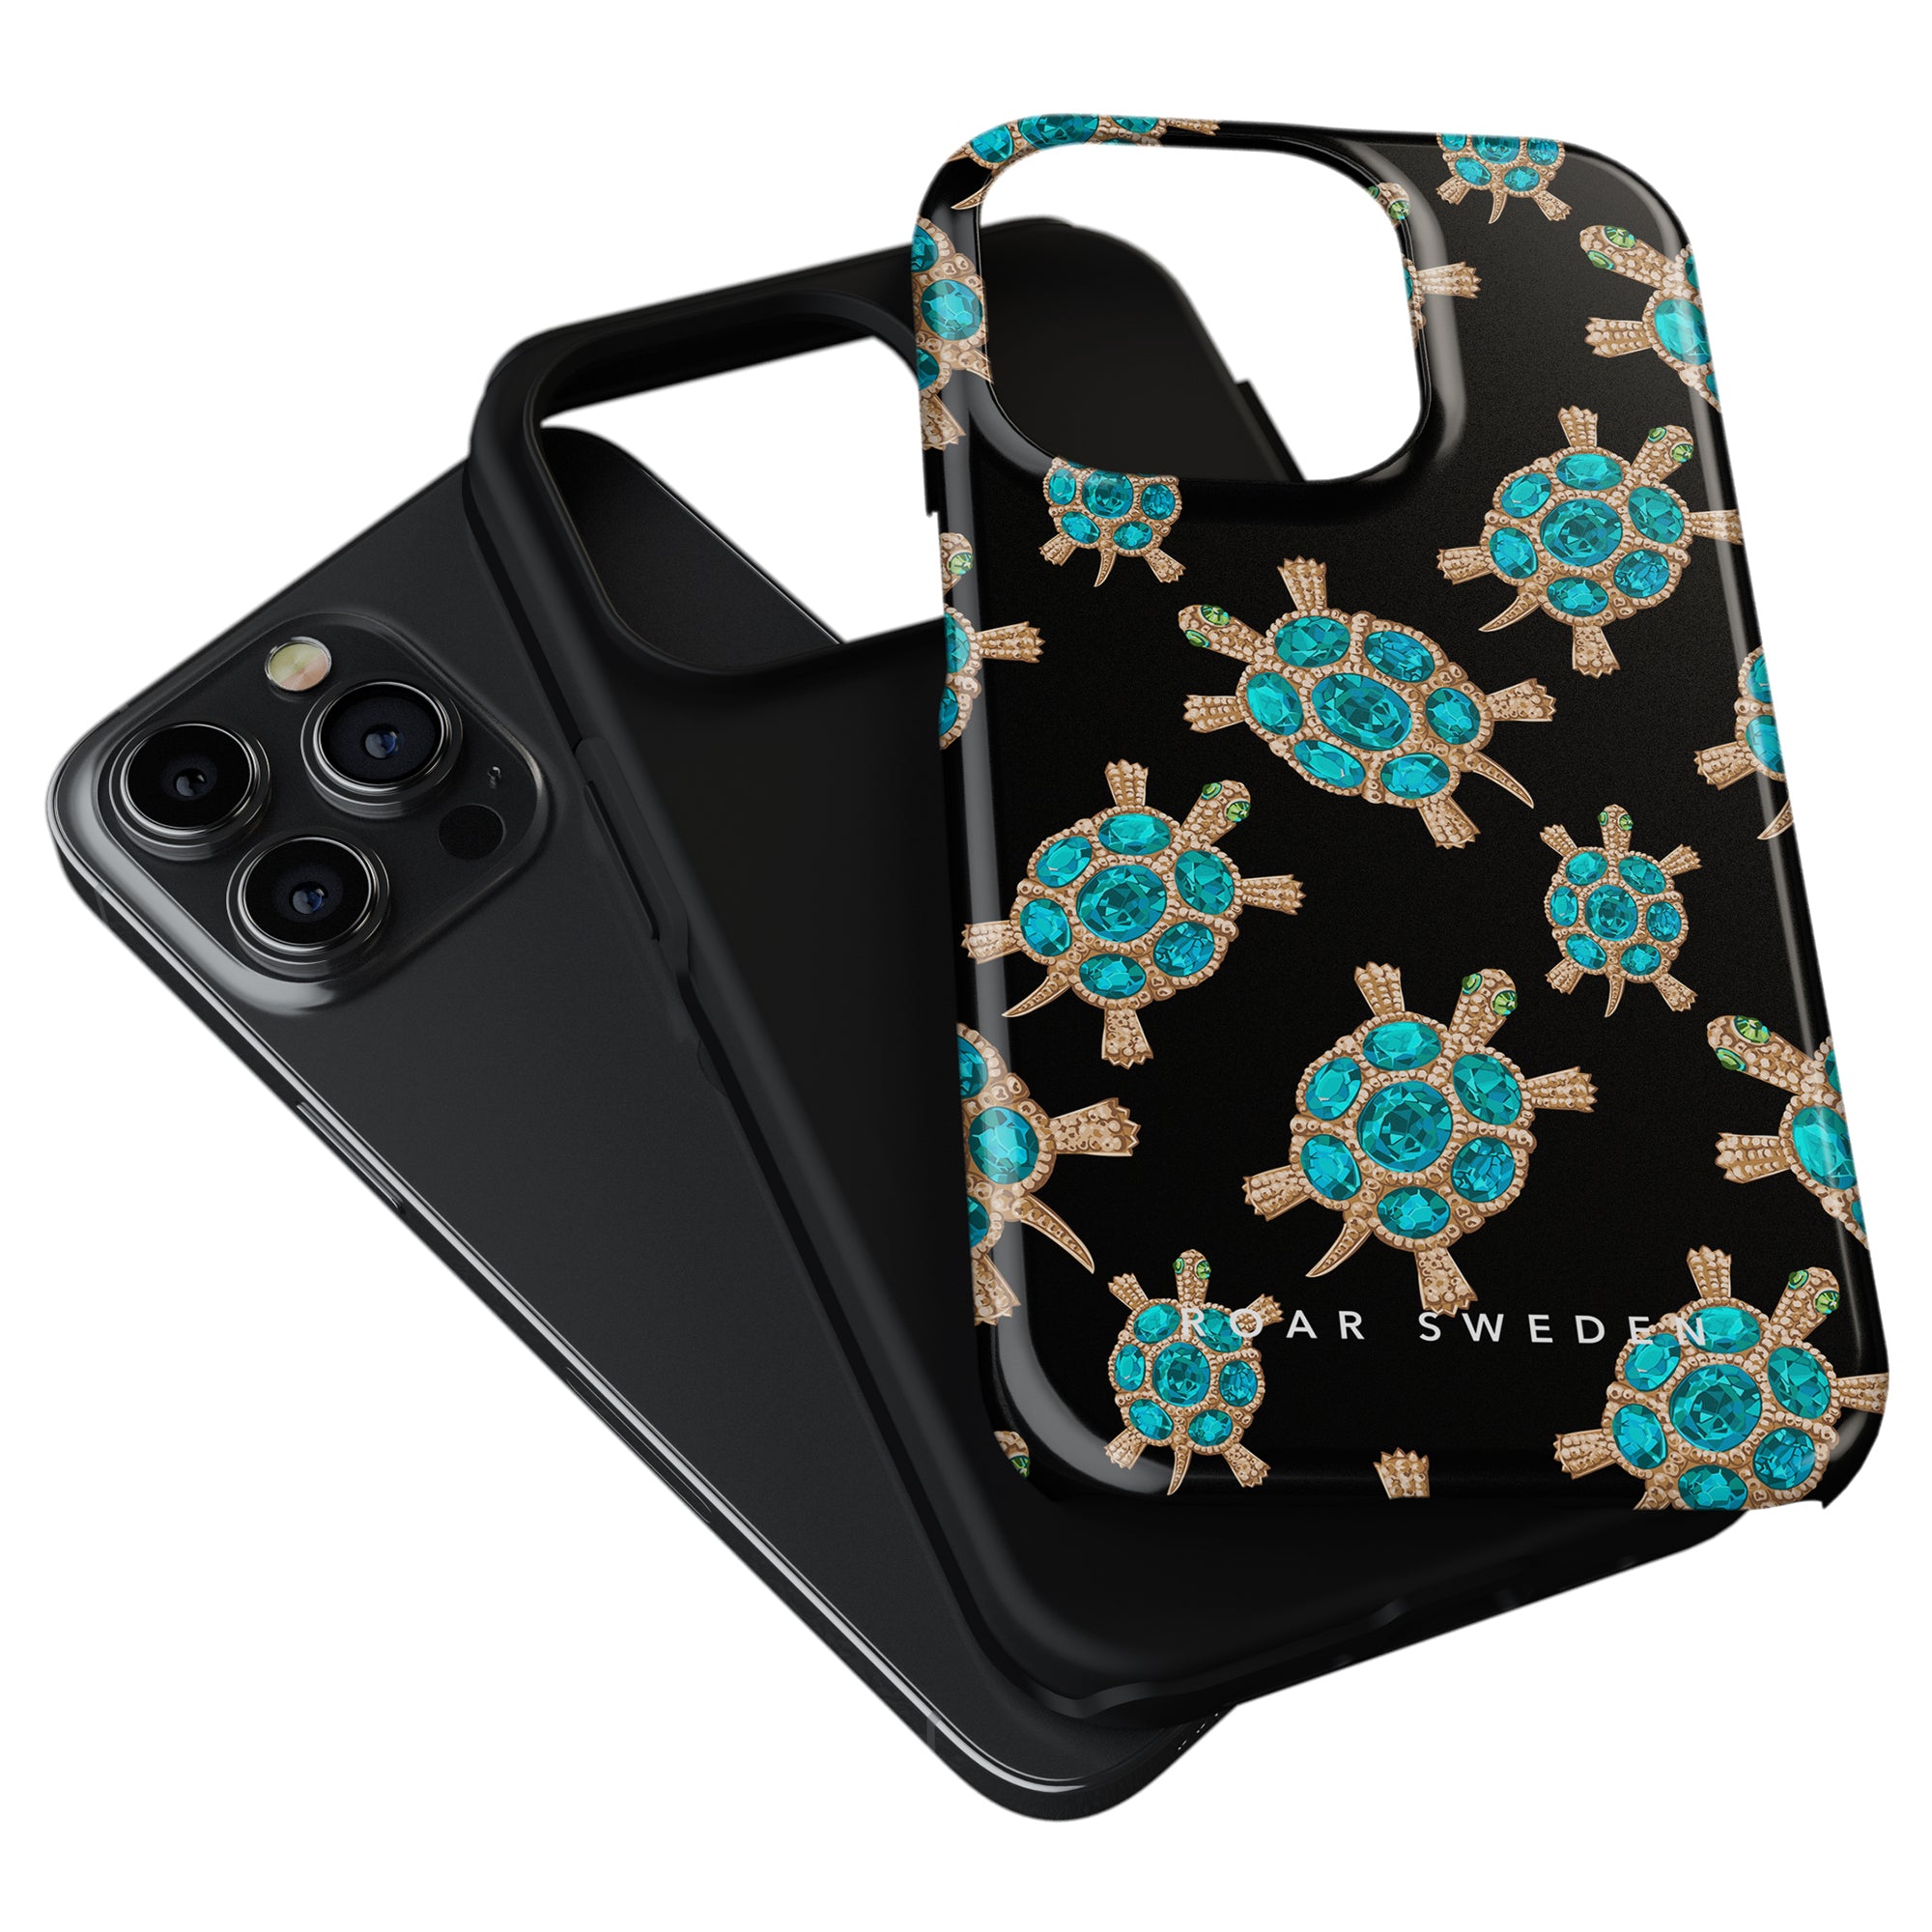 Black smartphone with a triple camera system and a Diamond Turtle - Tough Case from the Ocean Collection.